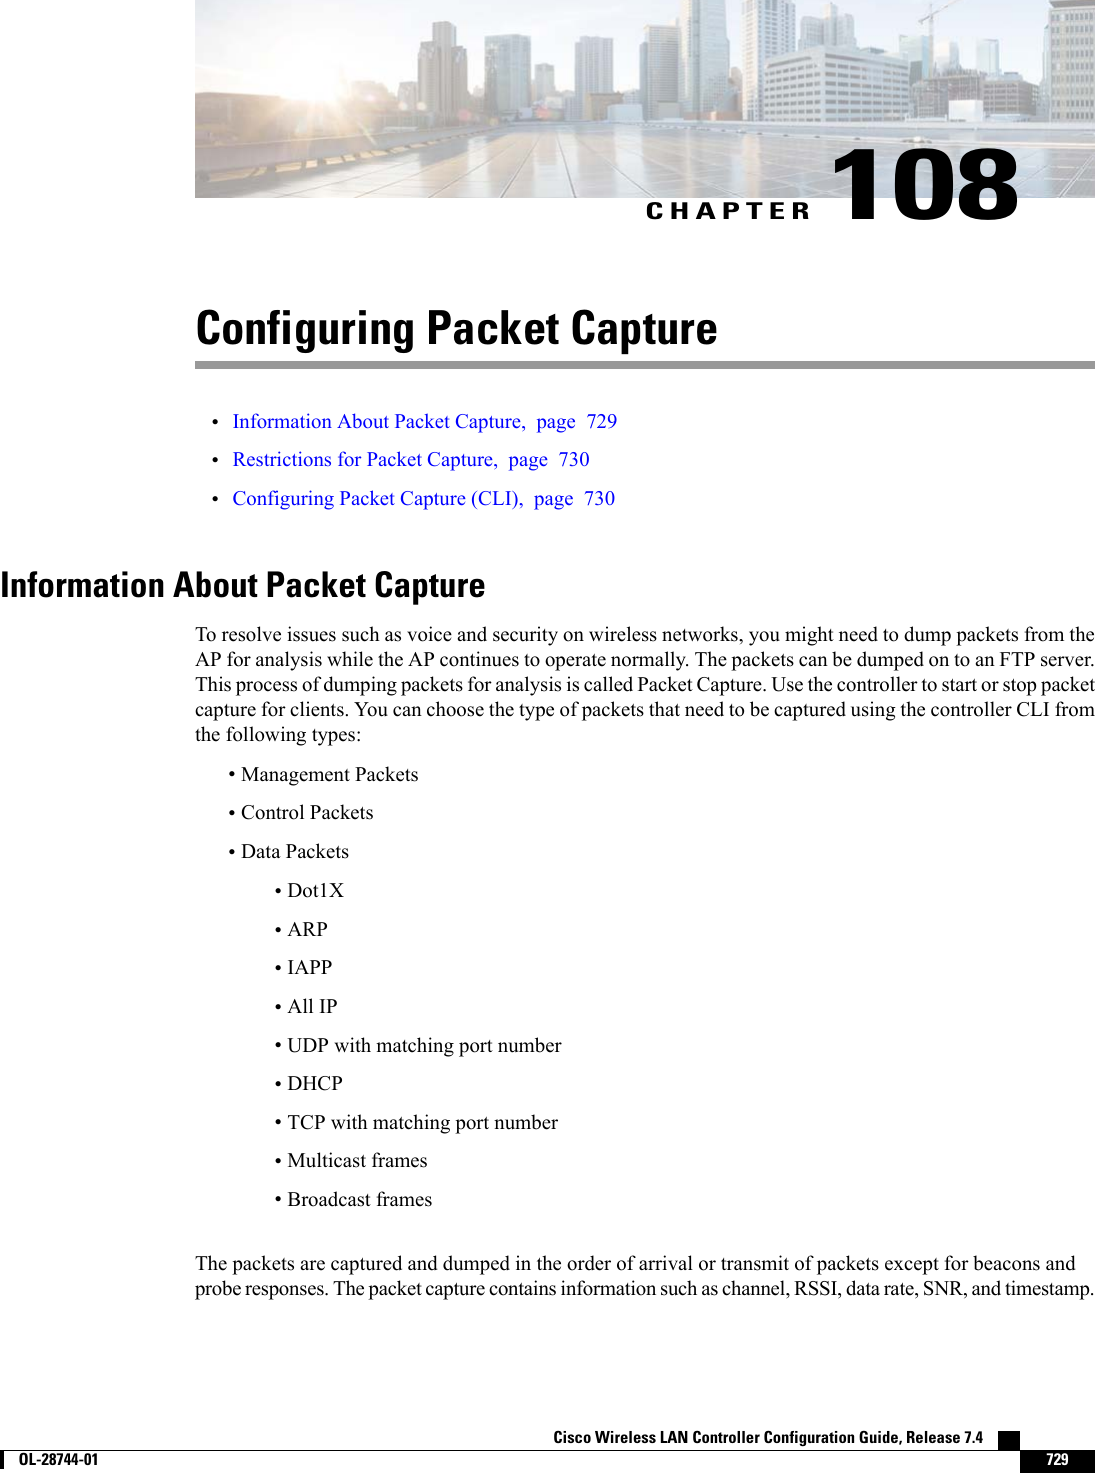 CHAPTER 108Configuring Packet Capture•Information About Packet Capture, page 729•Restrictions for Packet Capture, page 730•Configuring Packet Capture (CLI), page 730Information About Packet CaptureTo resolve issues such as voice and security on wireless networks, you might need to dump packets from theAP for analysis while the AP continues to operate normally. The packets can be dumped on to an FTP server.This process of dumping packets for analysis is called Packet Capture. Use the controller to start or stop packetcapture for clients. You can choose the type of packets that need to be captured using the controller CLI fromthe following types:•Management Packets•Control Packets•Data Packets•Dot1X•ARP•IAPP•All IP•UDP with matching port number•DHCP•TCP with matching port number•Multicast frames•Broadcast framesThe packets are captured and dumped in the order of arrival or transmit of packets except for beacons andprobe responses. The packet capture contains information such as channel, RSSI, data rate, SNR, and timestamp.Cisco Wireless LAN Controller Configuration Guide, Release 7.4        OL-28744-01 729